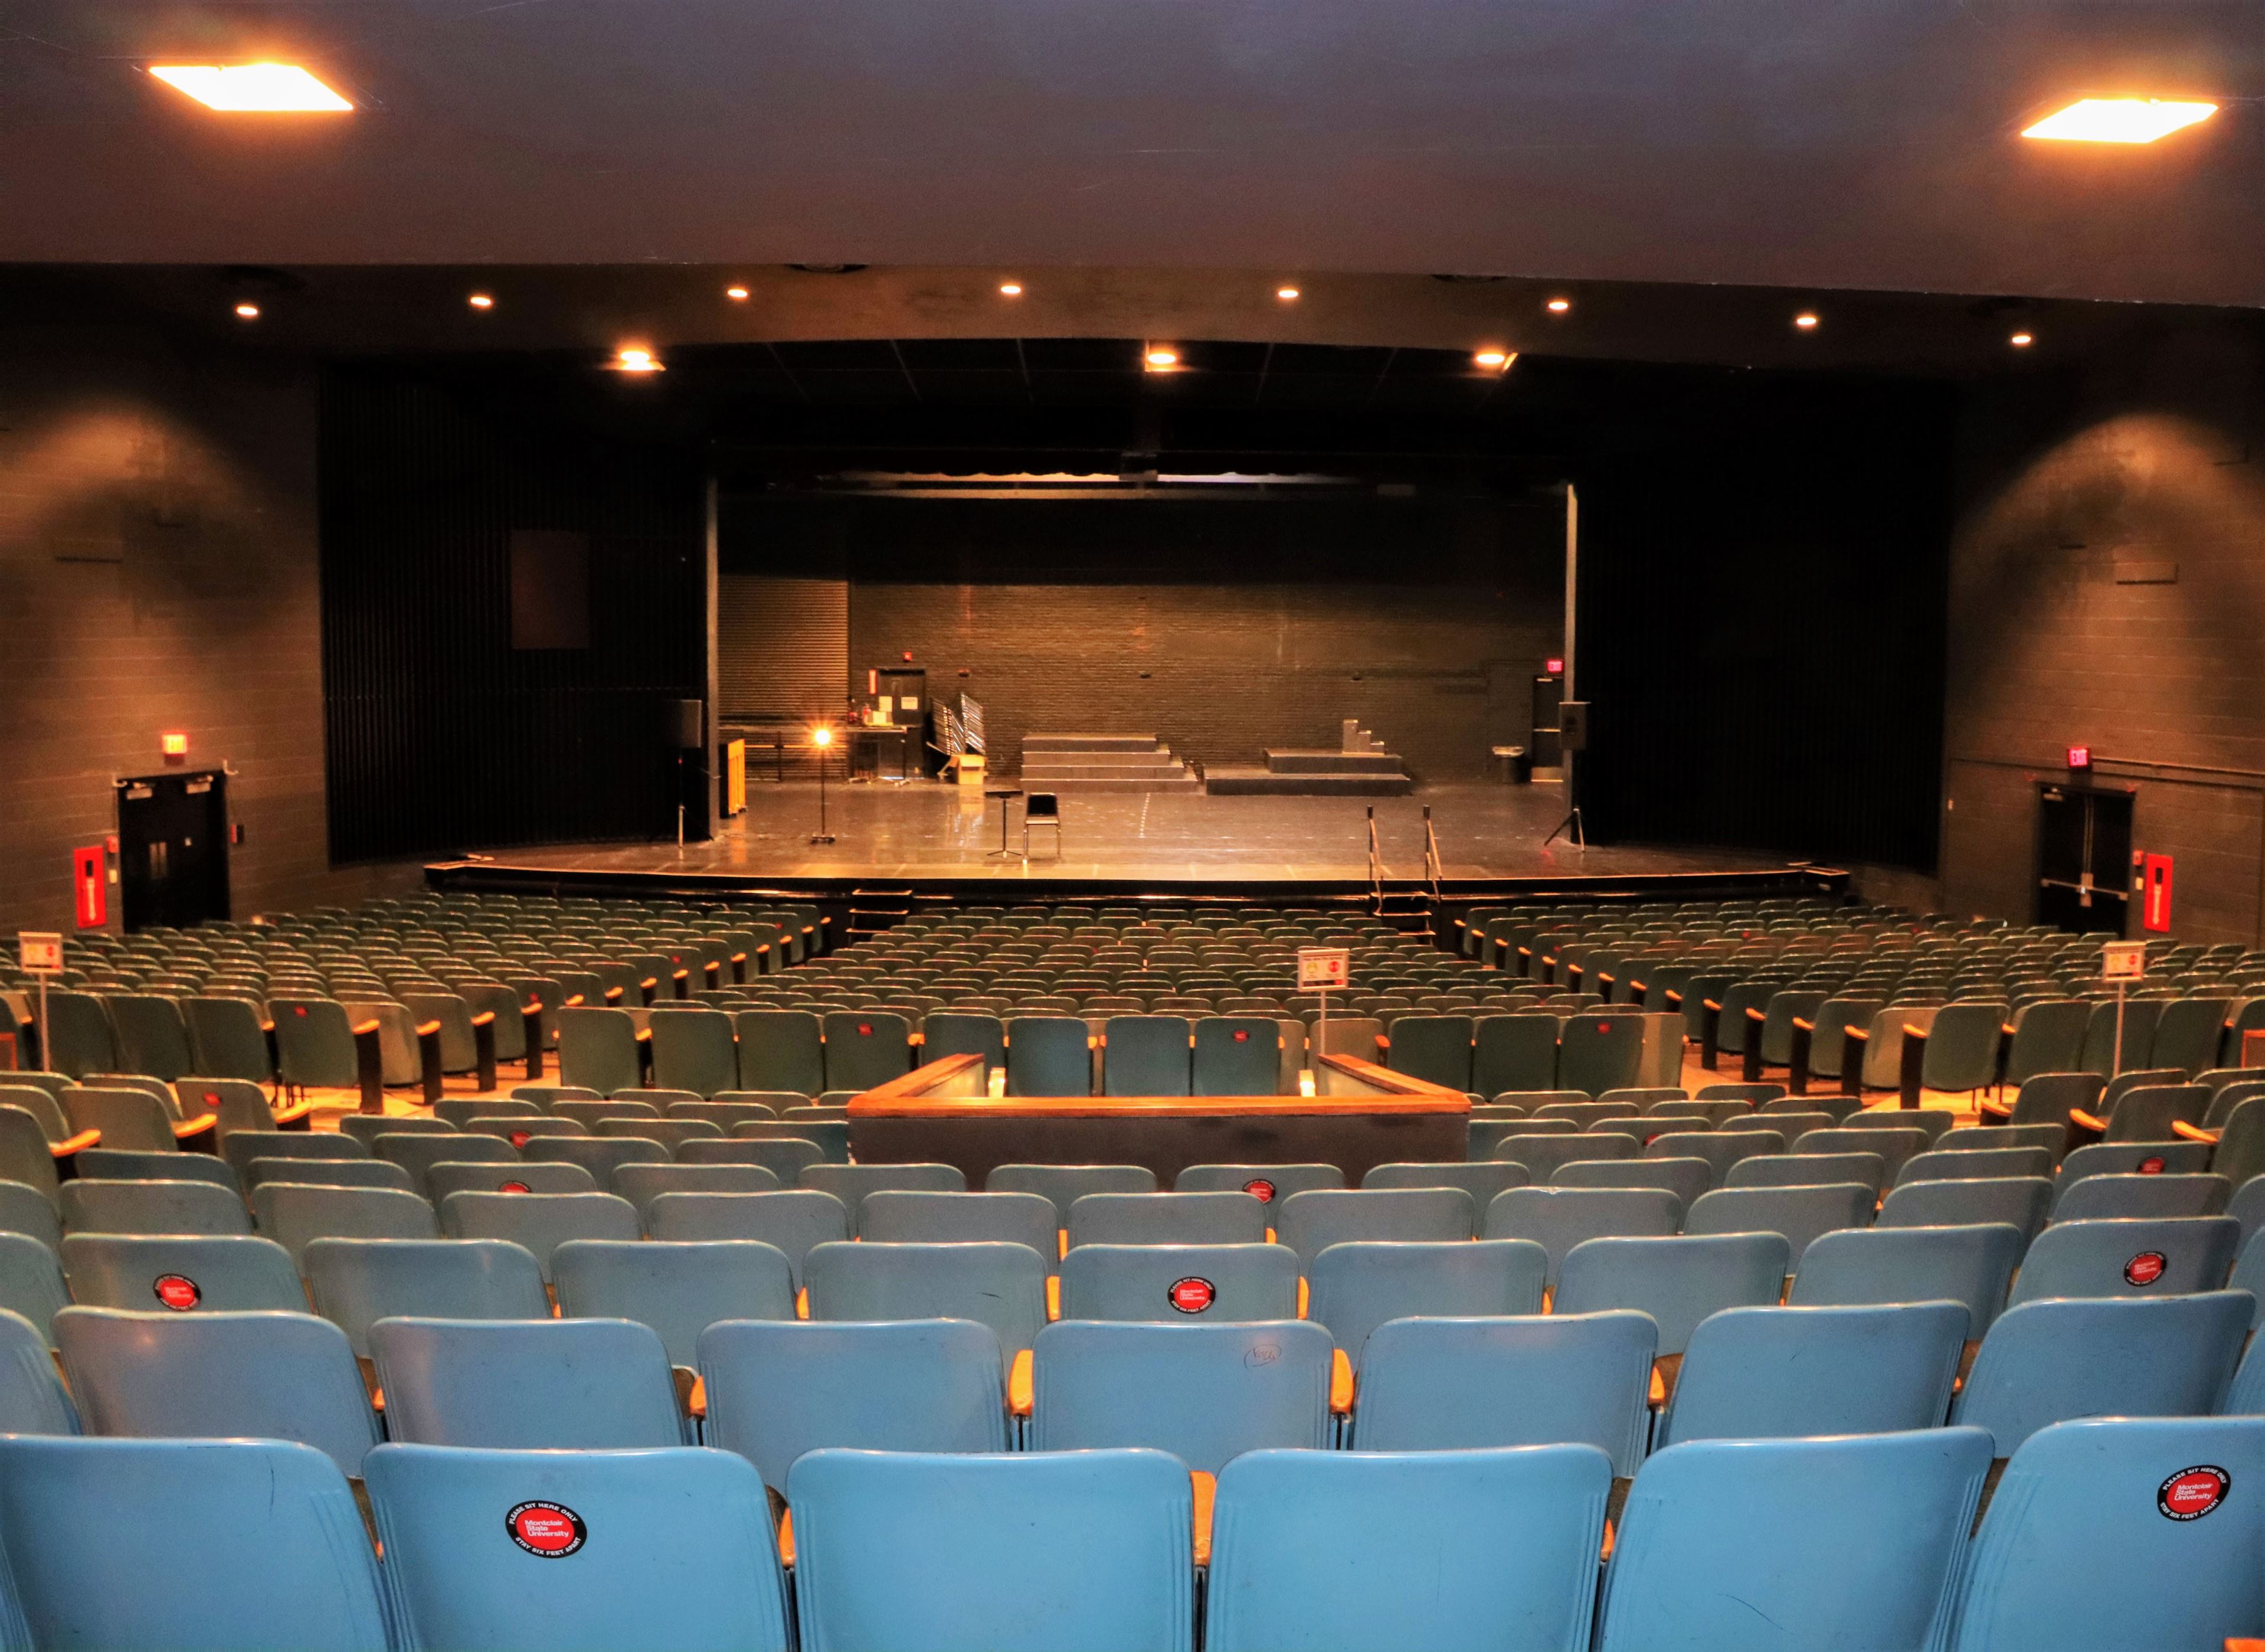 Memorial Auditorium has not gotten much use since the start of the pandemic and often sits vacant. John La Rosa | The Montclarion